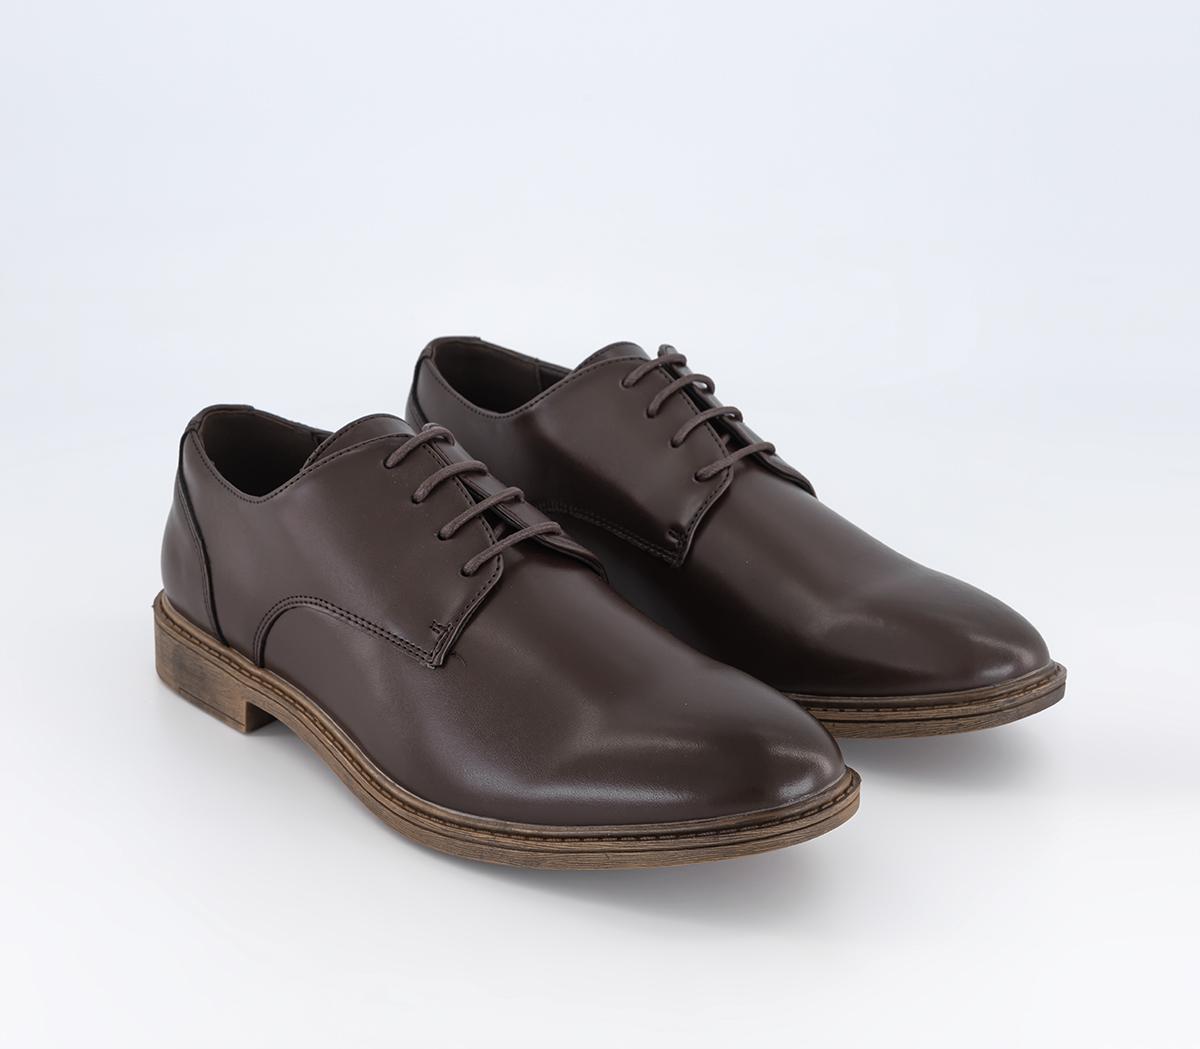 OFFICE Mens Curton Leather Derby Shoes Brown, 8